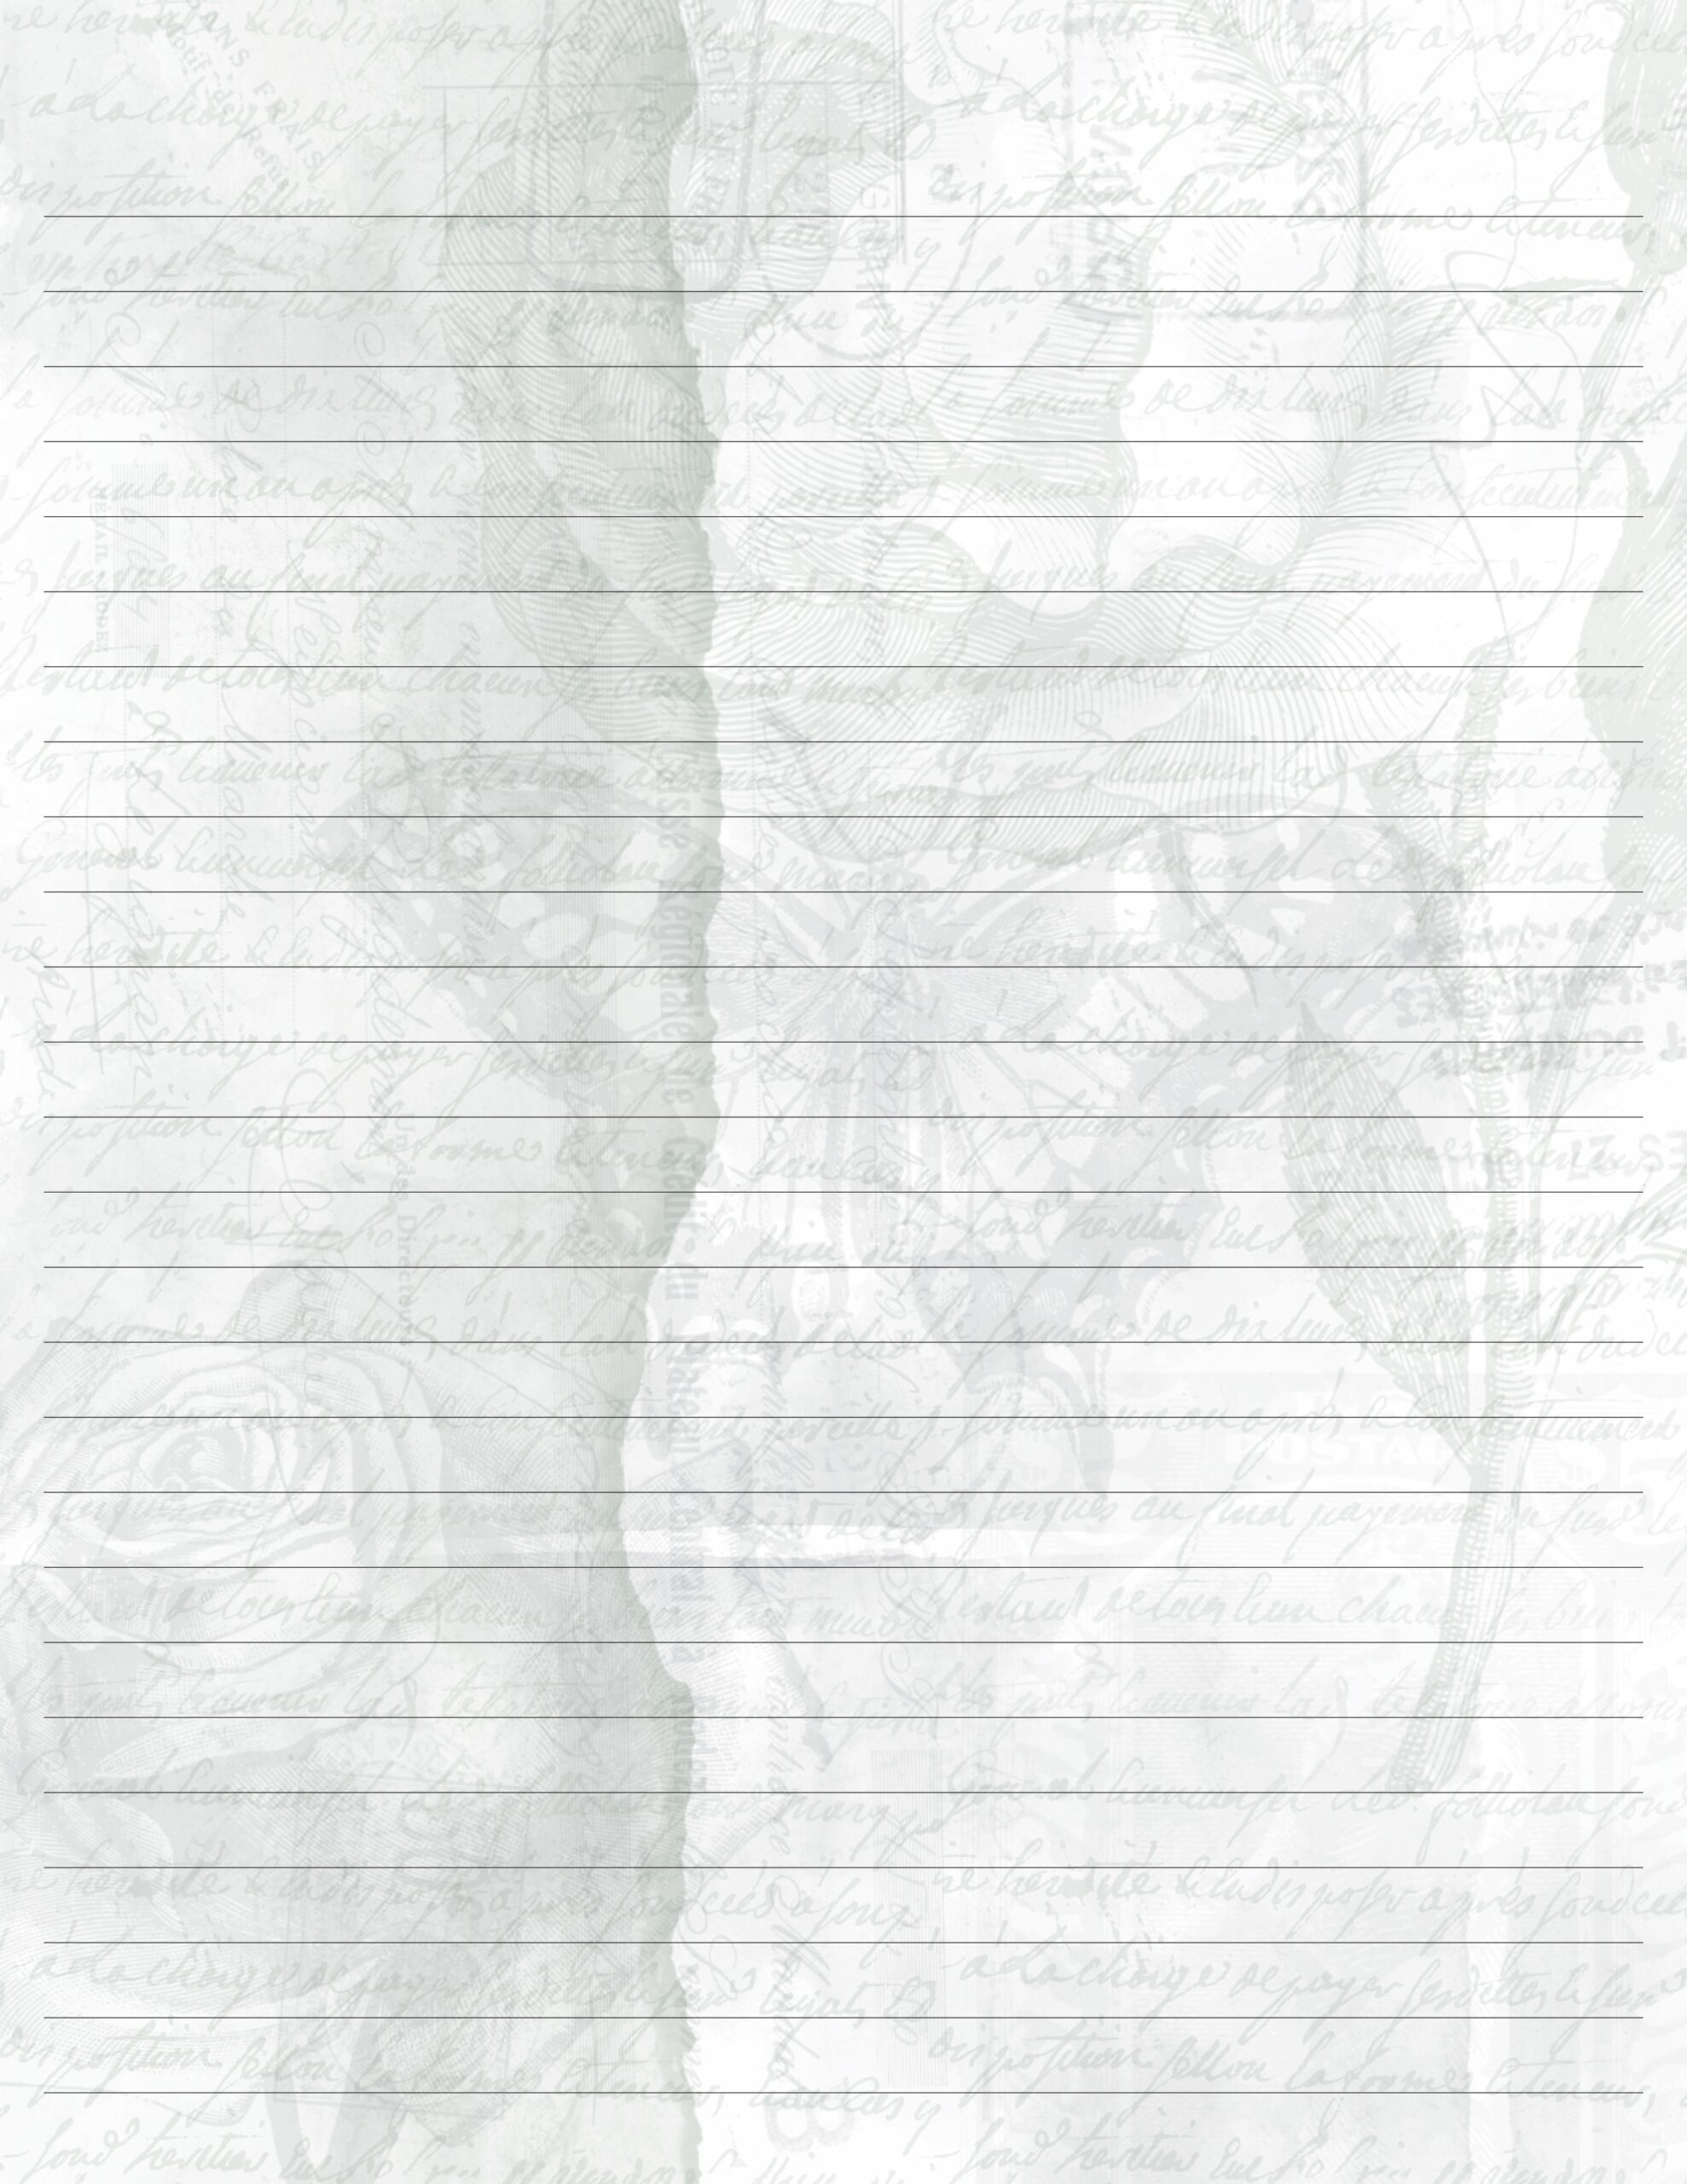 printable Lined paper